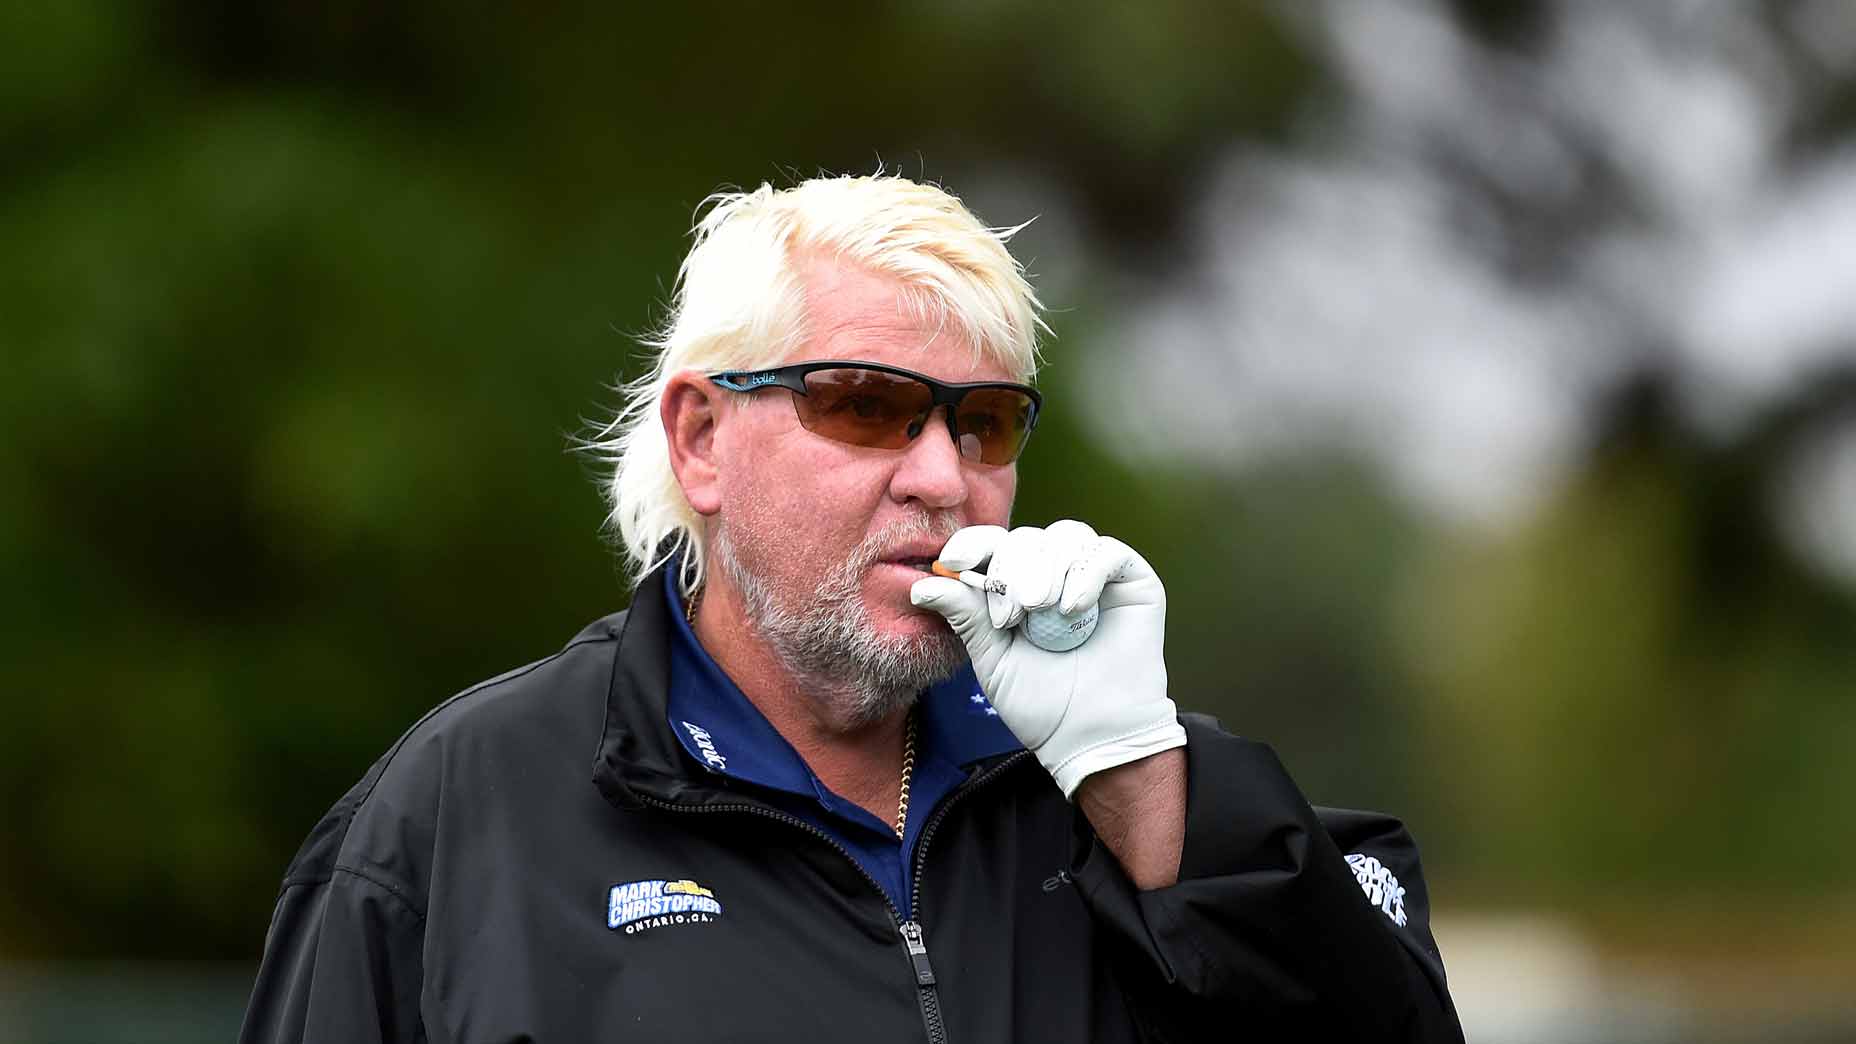 John Daly made the most John Daly hole-in-one ever.